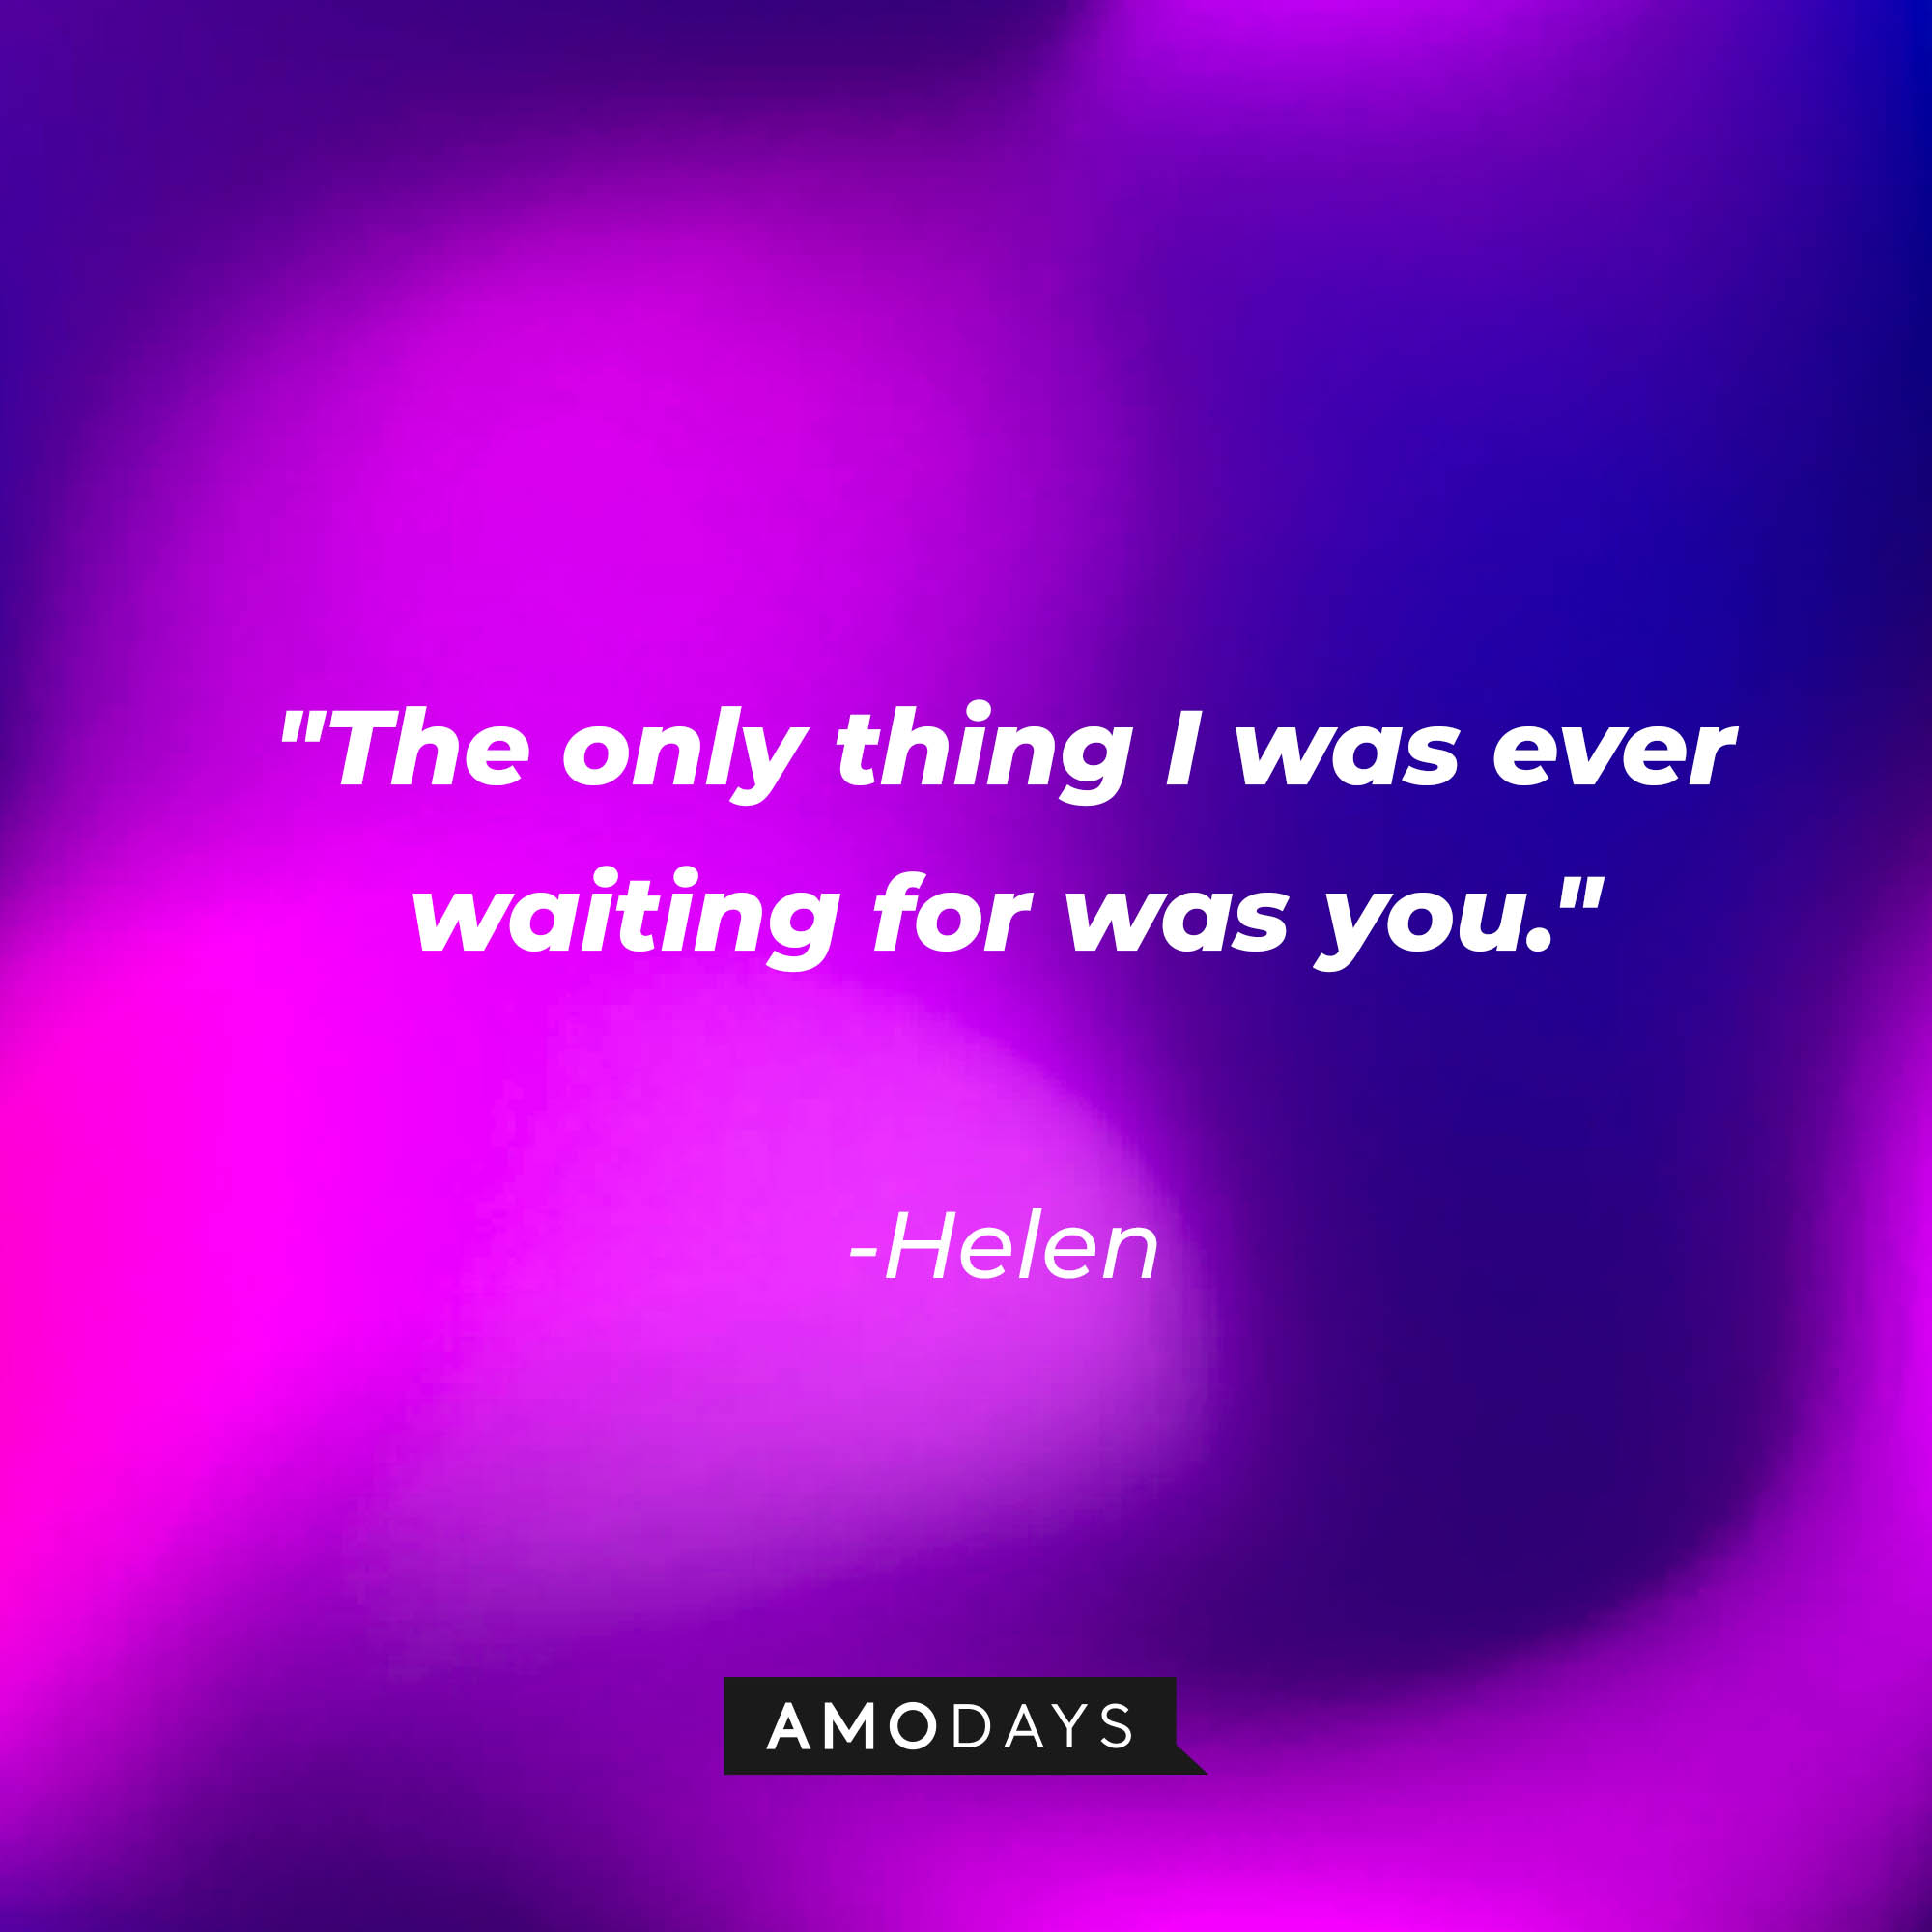 Helen's quote: "The only thing I was ever waiting for was you." | Source: AmoDays